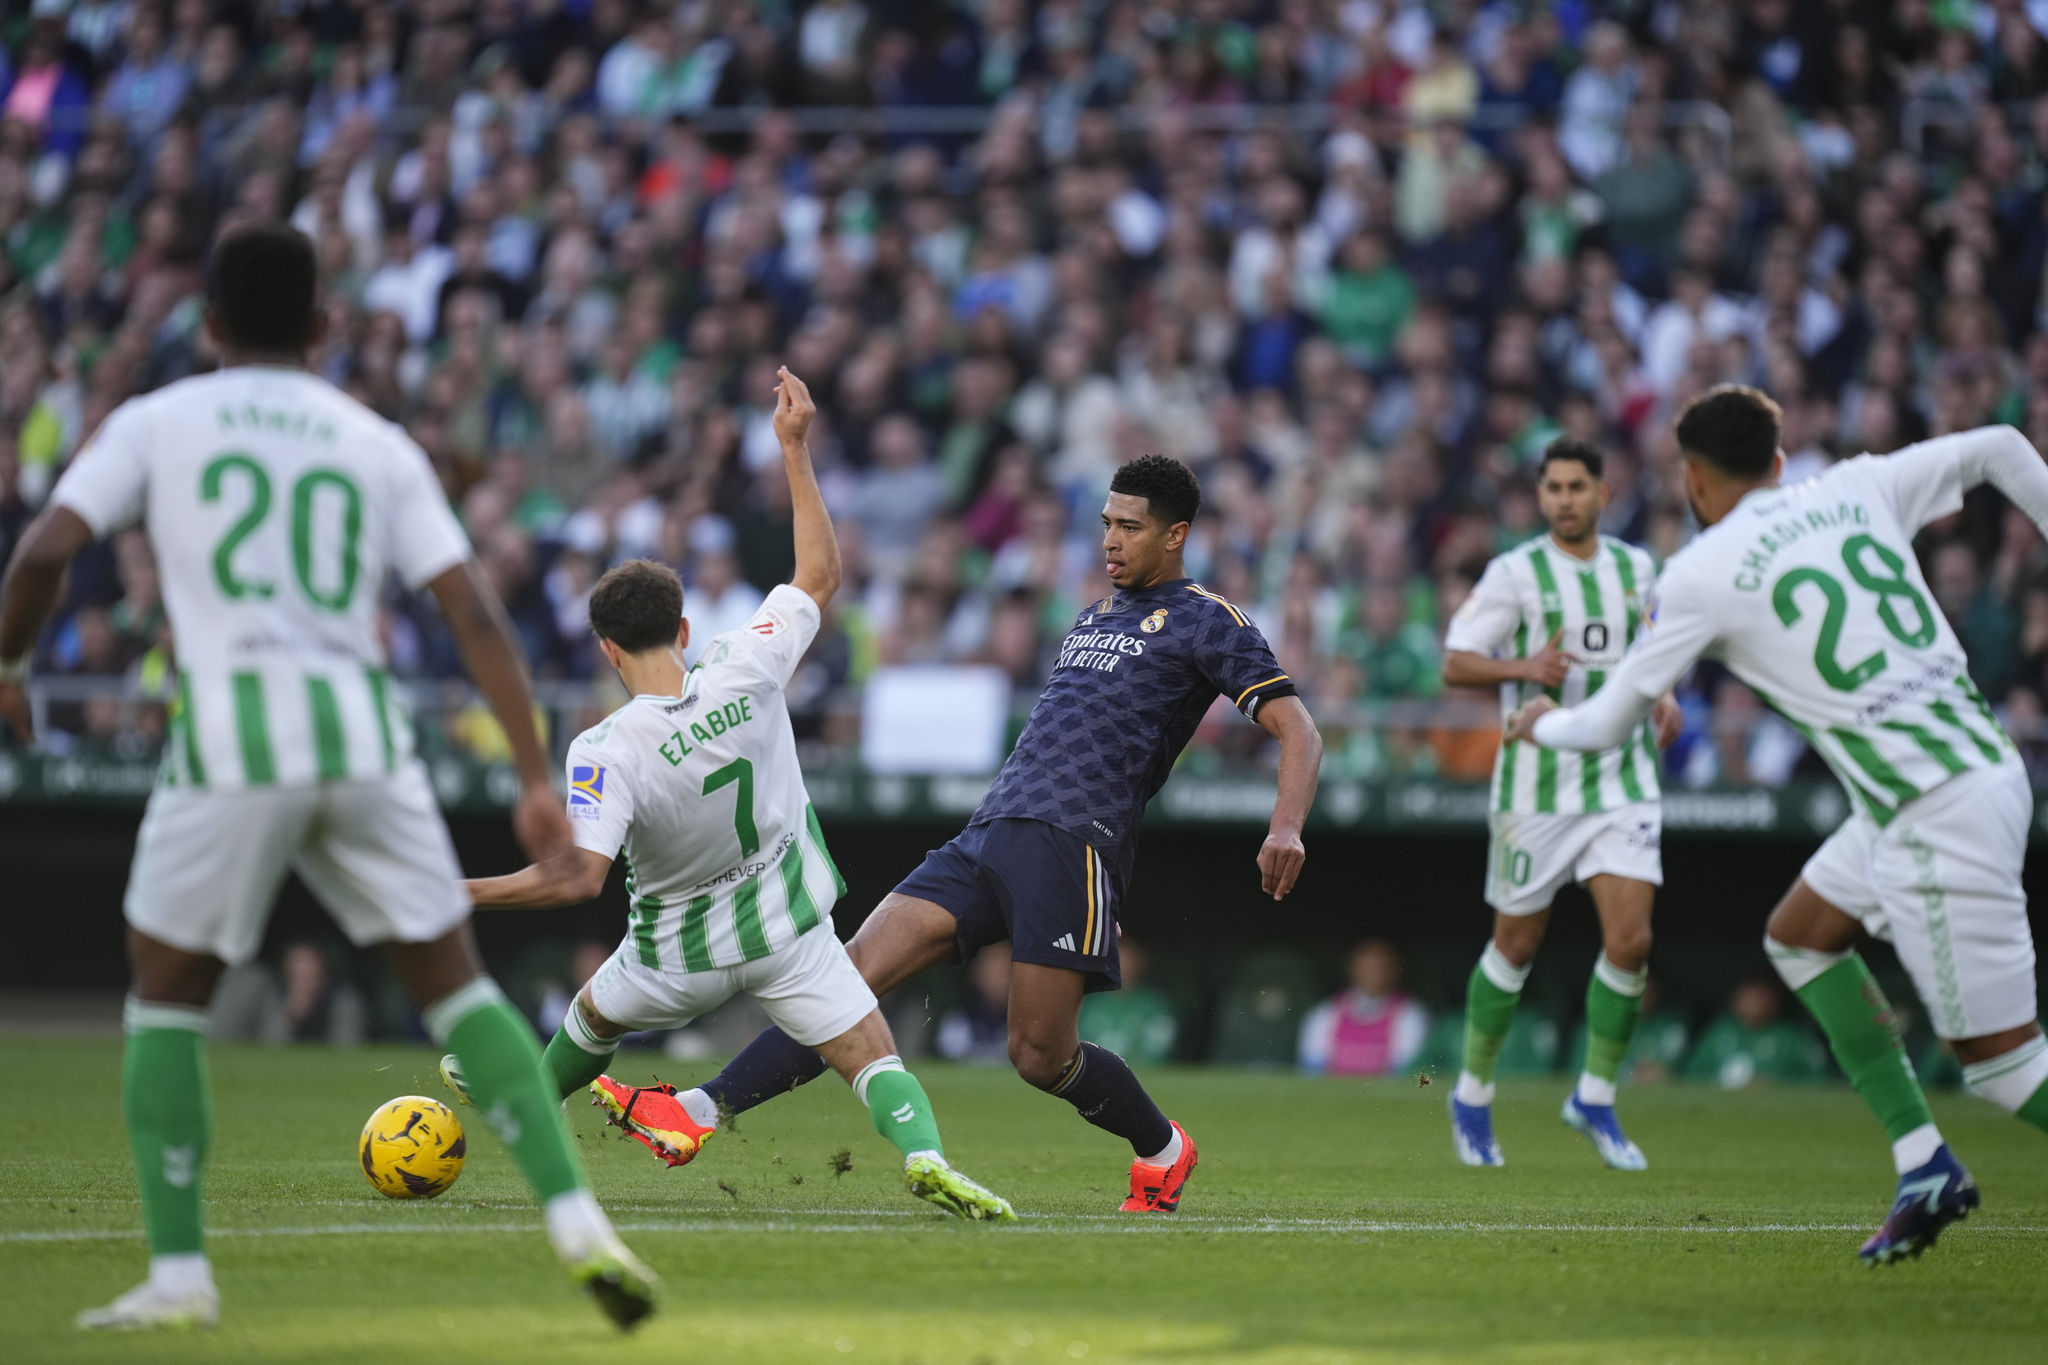 Real Betis 0-0 Real Madrid LIVE: Real Madrid goal ruled out for offside